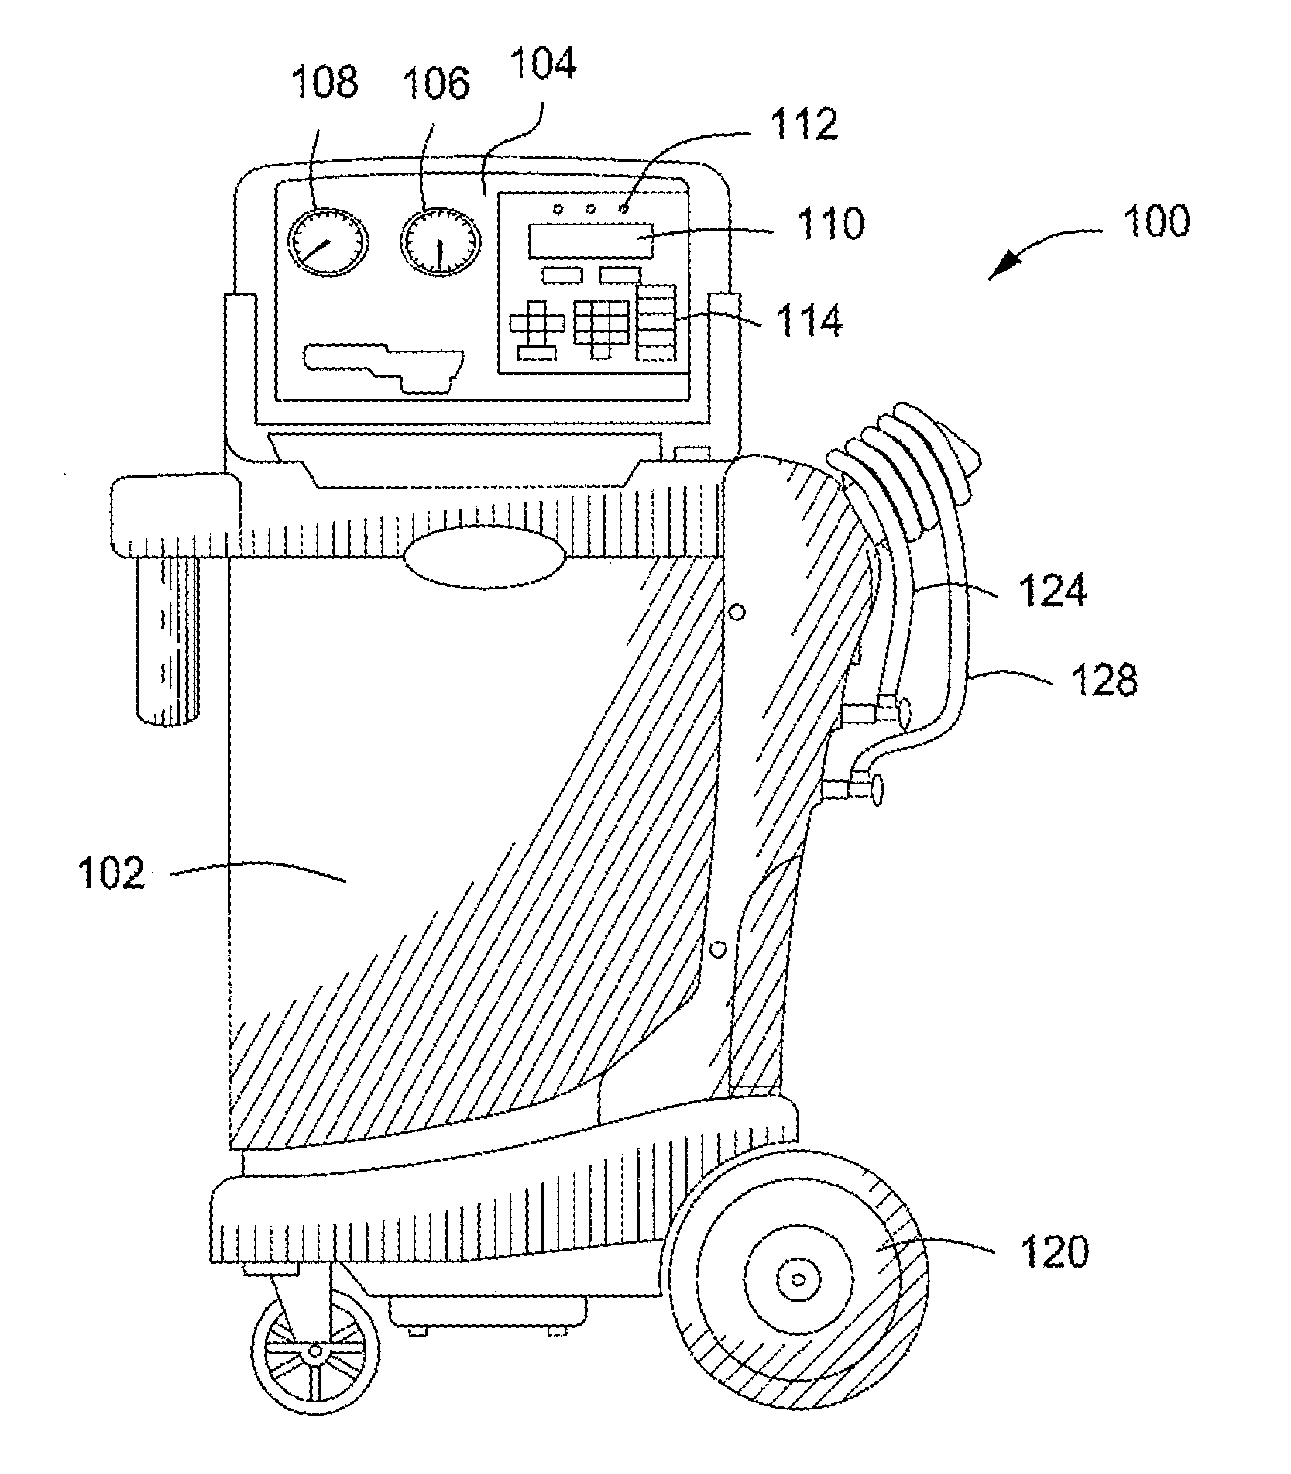 Apparatus and Method for Identifying and Operating Air Purge in Safe Mode and Having a Dip Tube